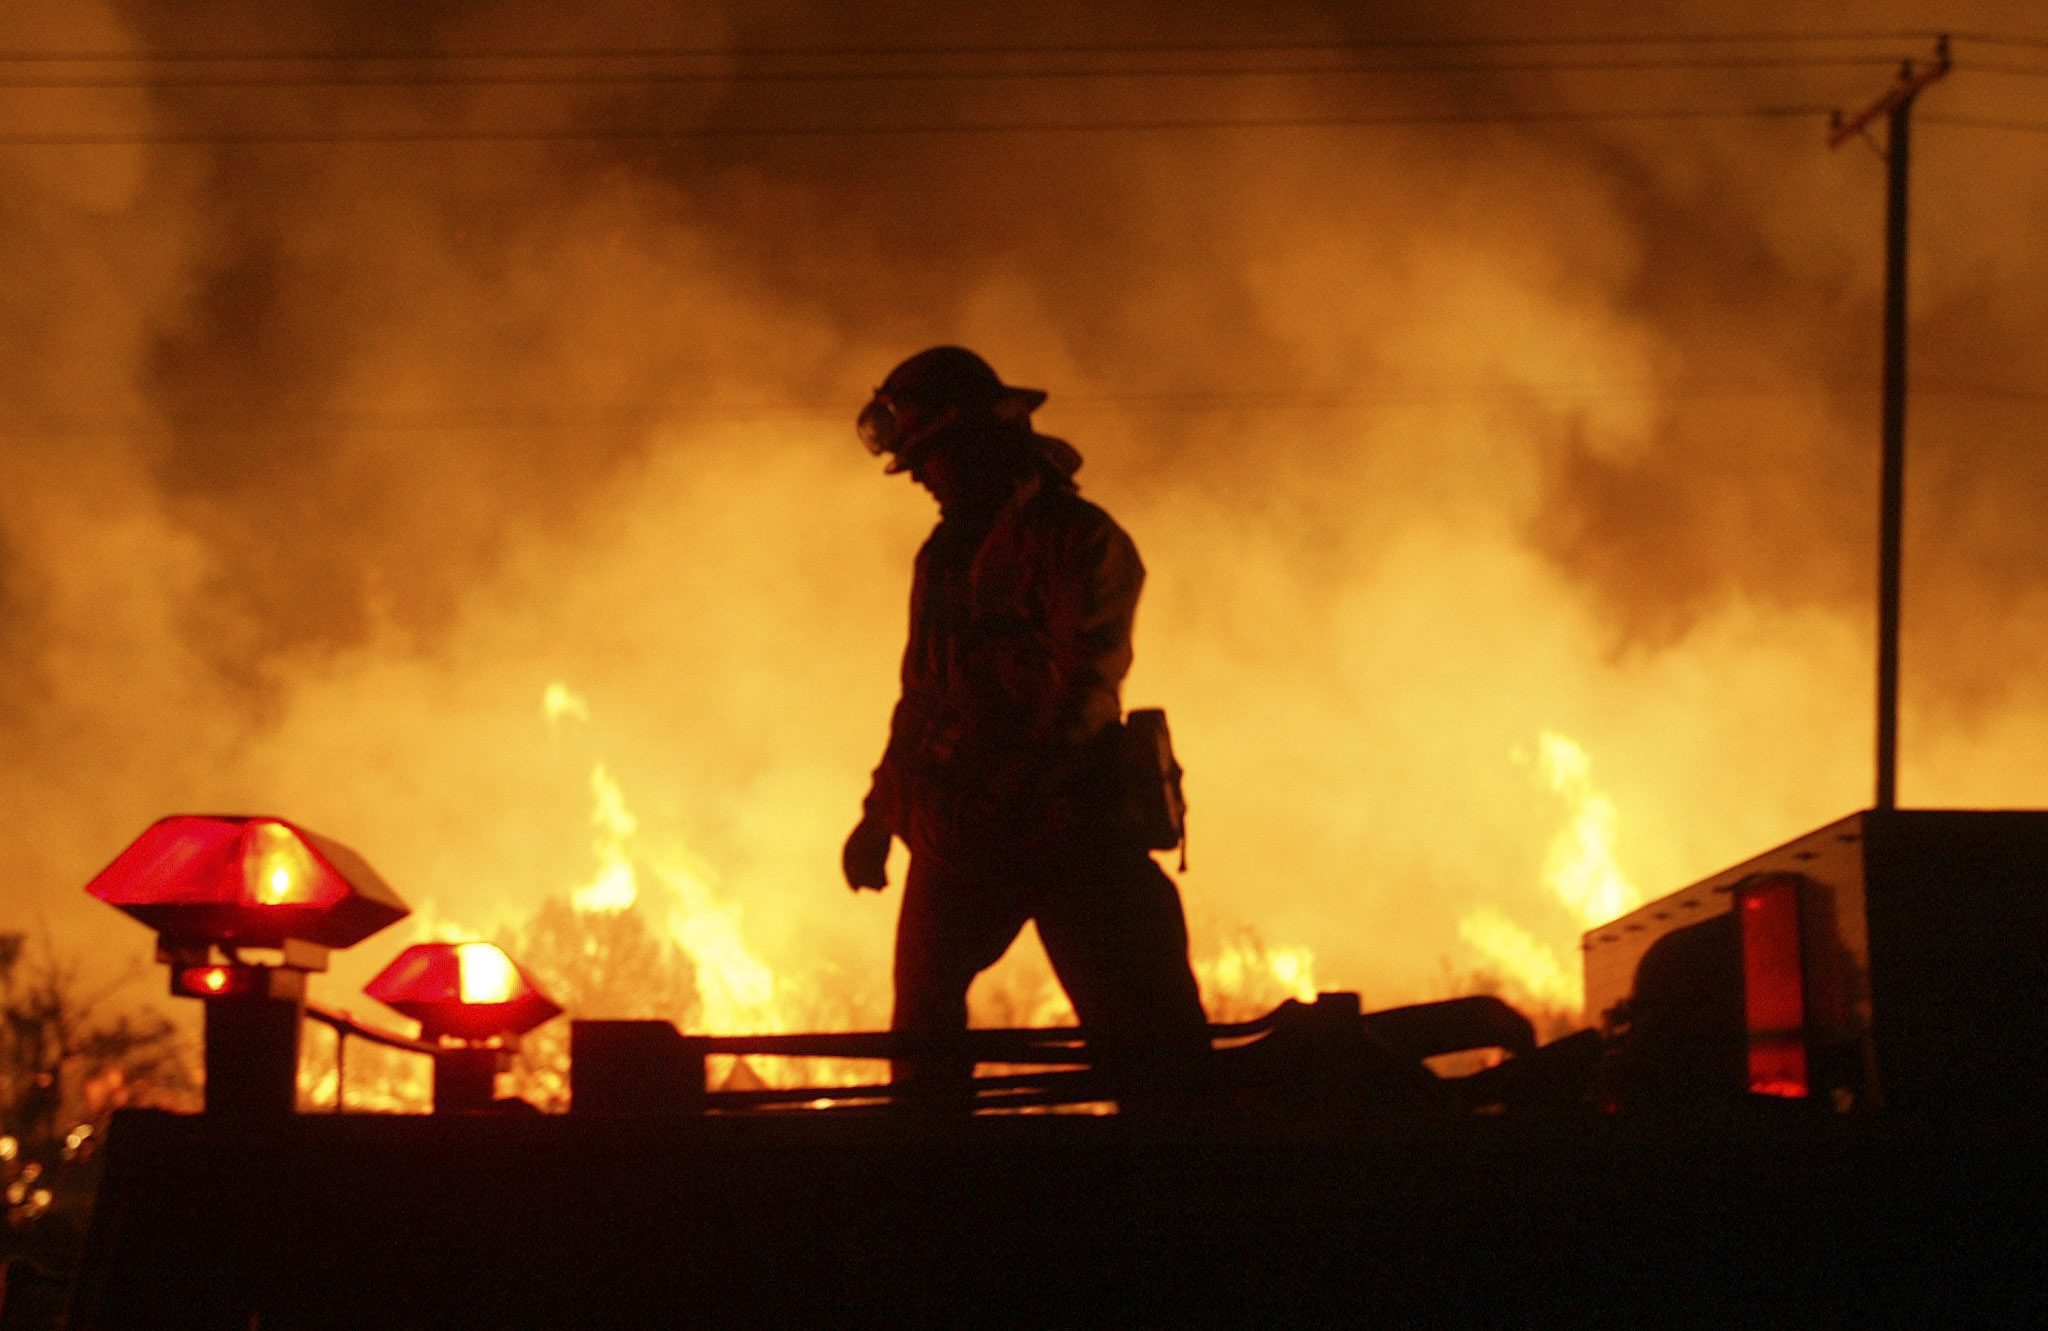 INCENDI: USA; CALIFORNIA, UN UCCELLO HA CAUSATO L'INCENDIO  A Los Angeles County firefighter walks atop a fire engine while silhouetted by flames in Acton, California late Tuesday, 20 July 2004.  The Crown Fire, in Acton, has burnt over 5,000 acres in less then 12 hours fed by high winds and superheating grasses and brush.  BRENDAN MCDERMID   ANSA-CD